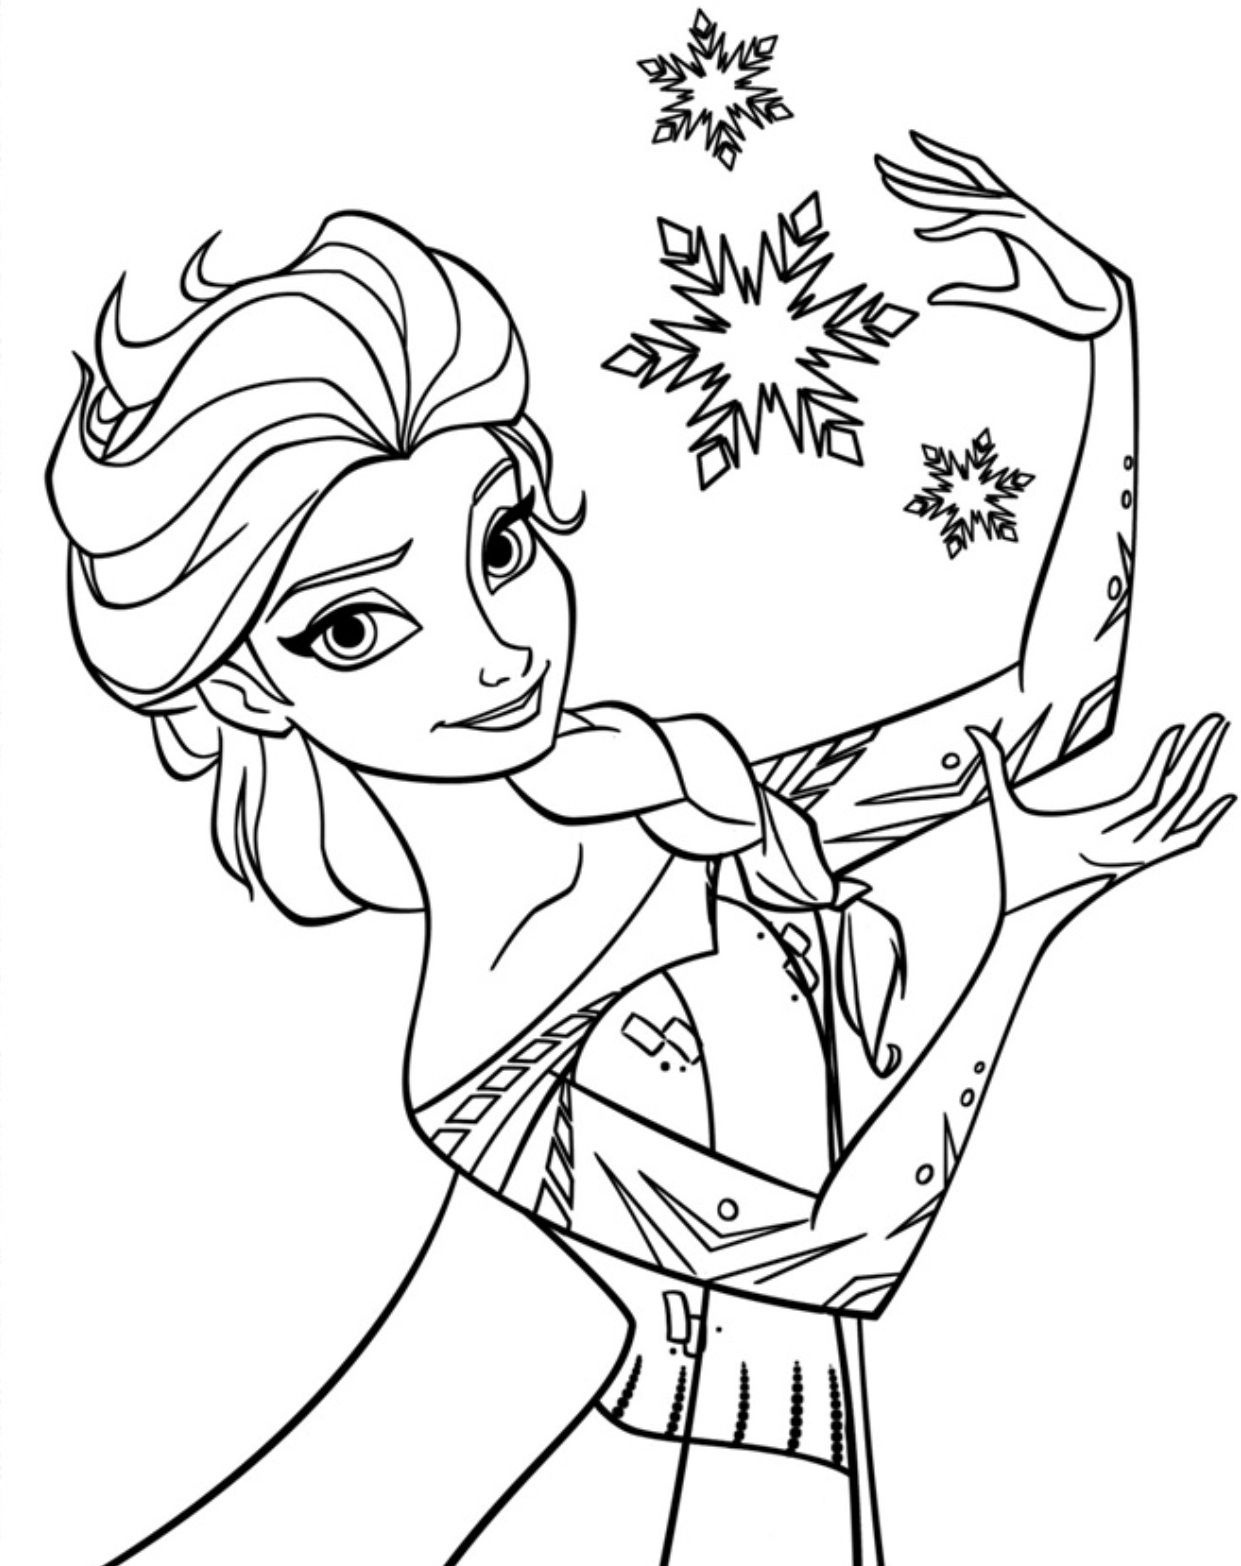 Free Printable Elsa Coloring Pages For Kids | Elsa | Princess - Free Printable Frozen Coloring Pages